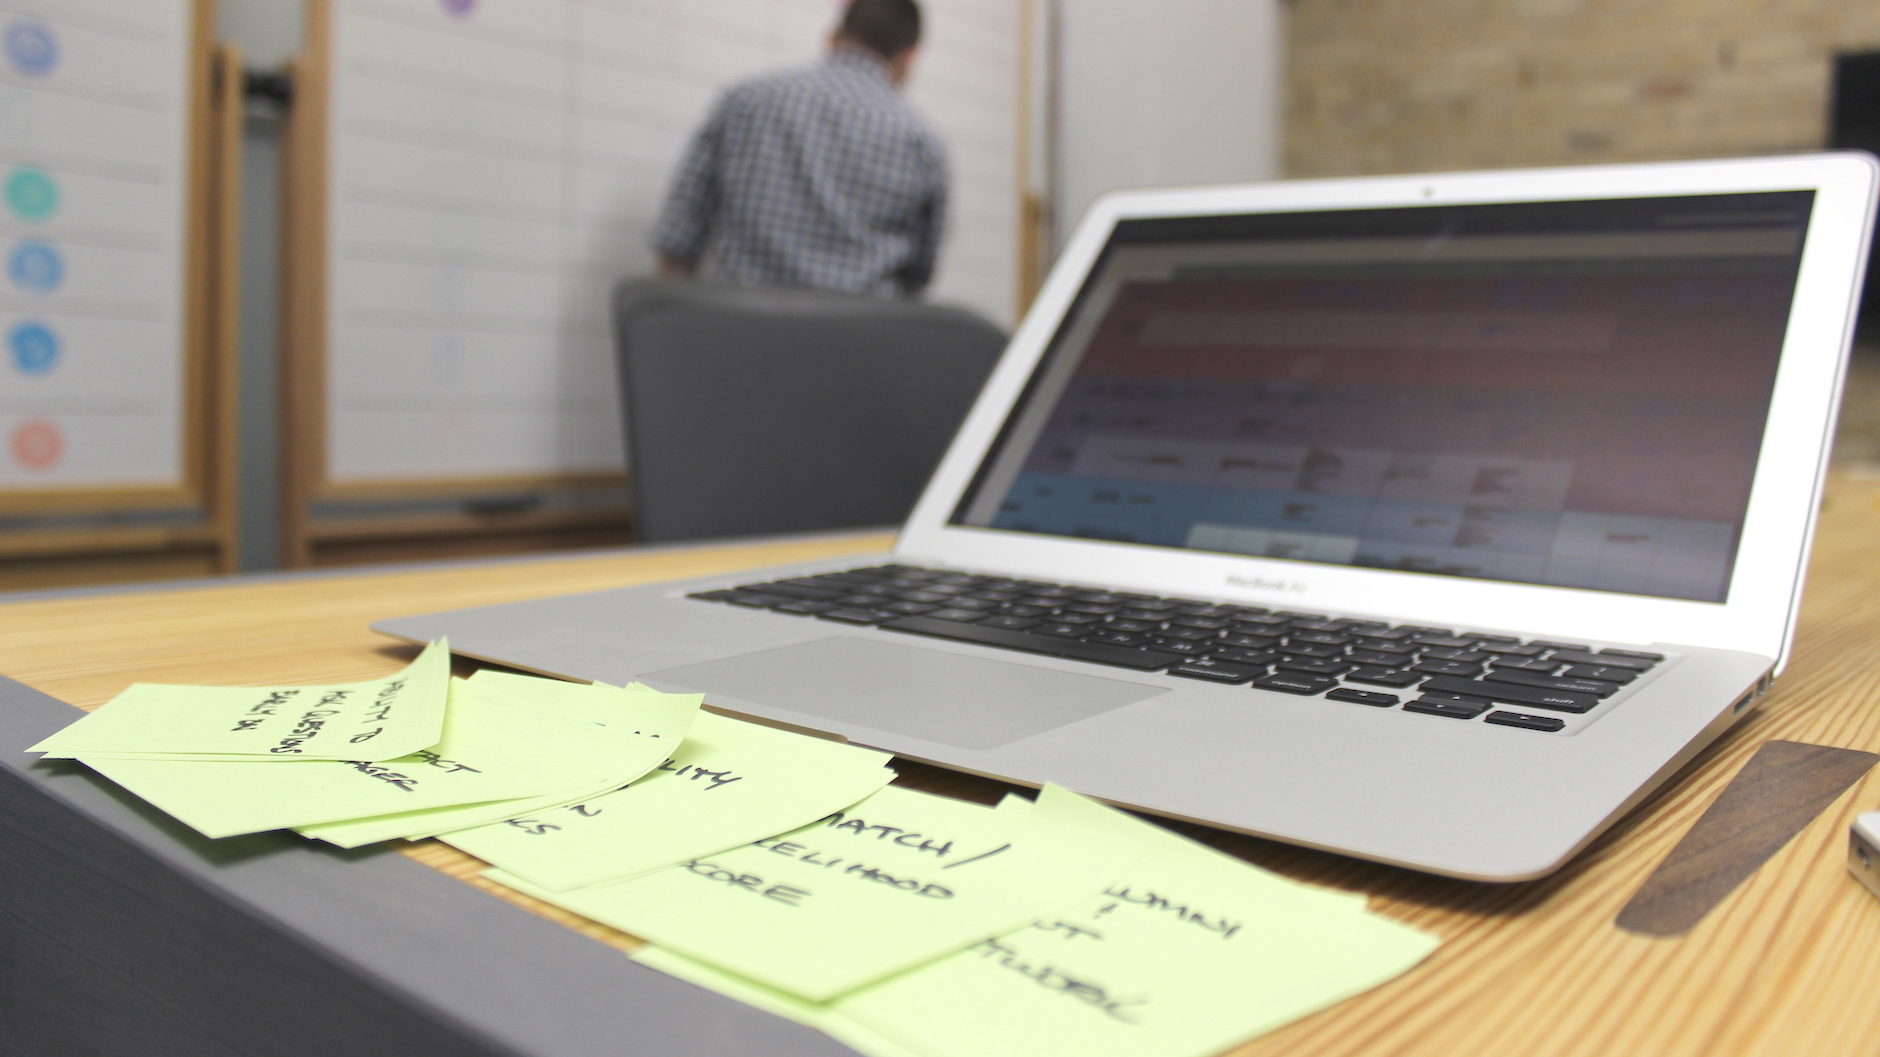 A laptop sitting on a desk. There are light green sticky notes on the desk describing the difference between user experience and usability. There is a UX designer writing on a whiteboard in the background.